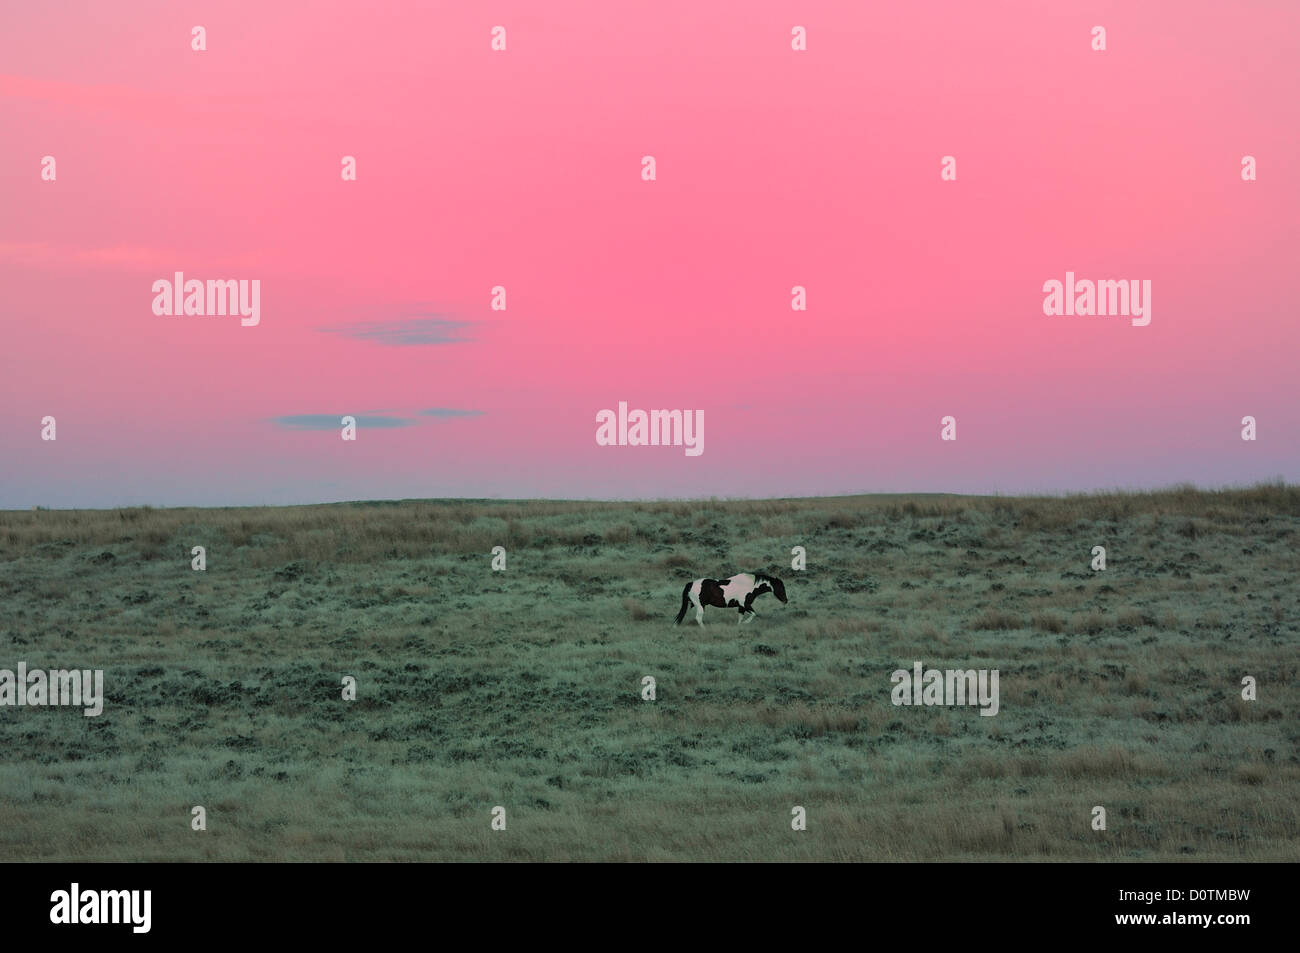 Mood, lonesome, american, west, wild, grassland, pink, sky, green, Horse, Wyoming, USA, United States, America, North America, Stock Photo